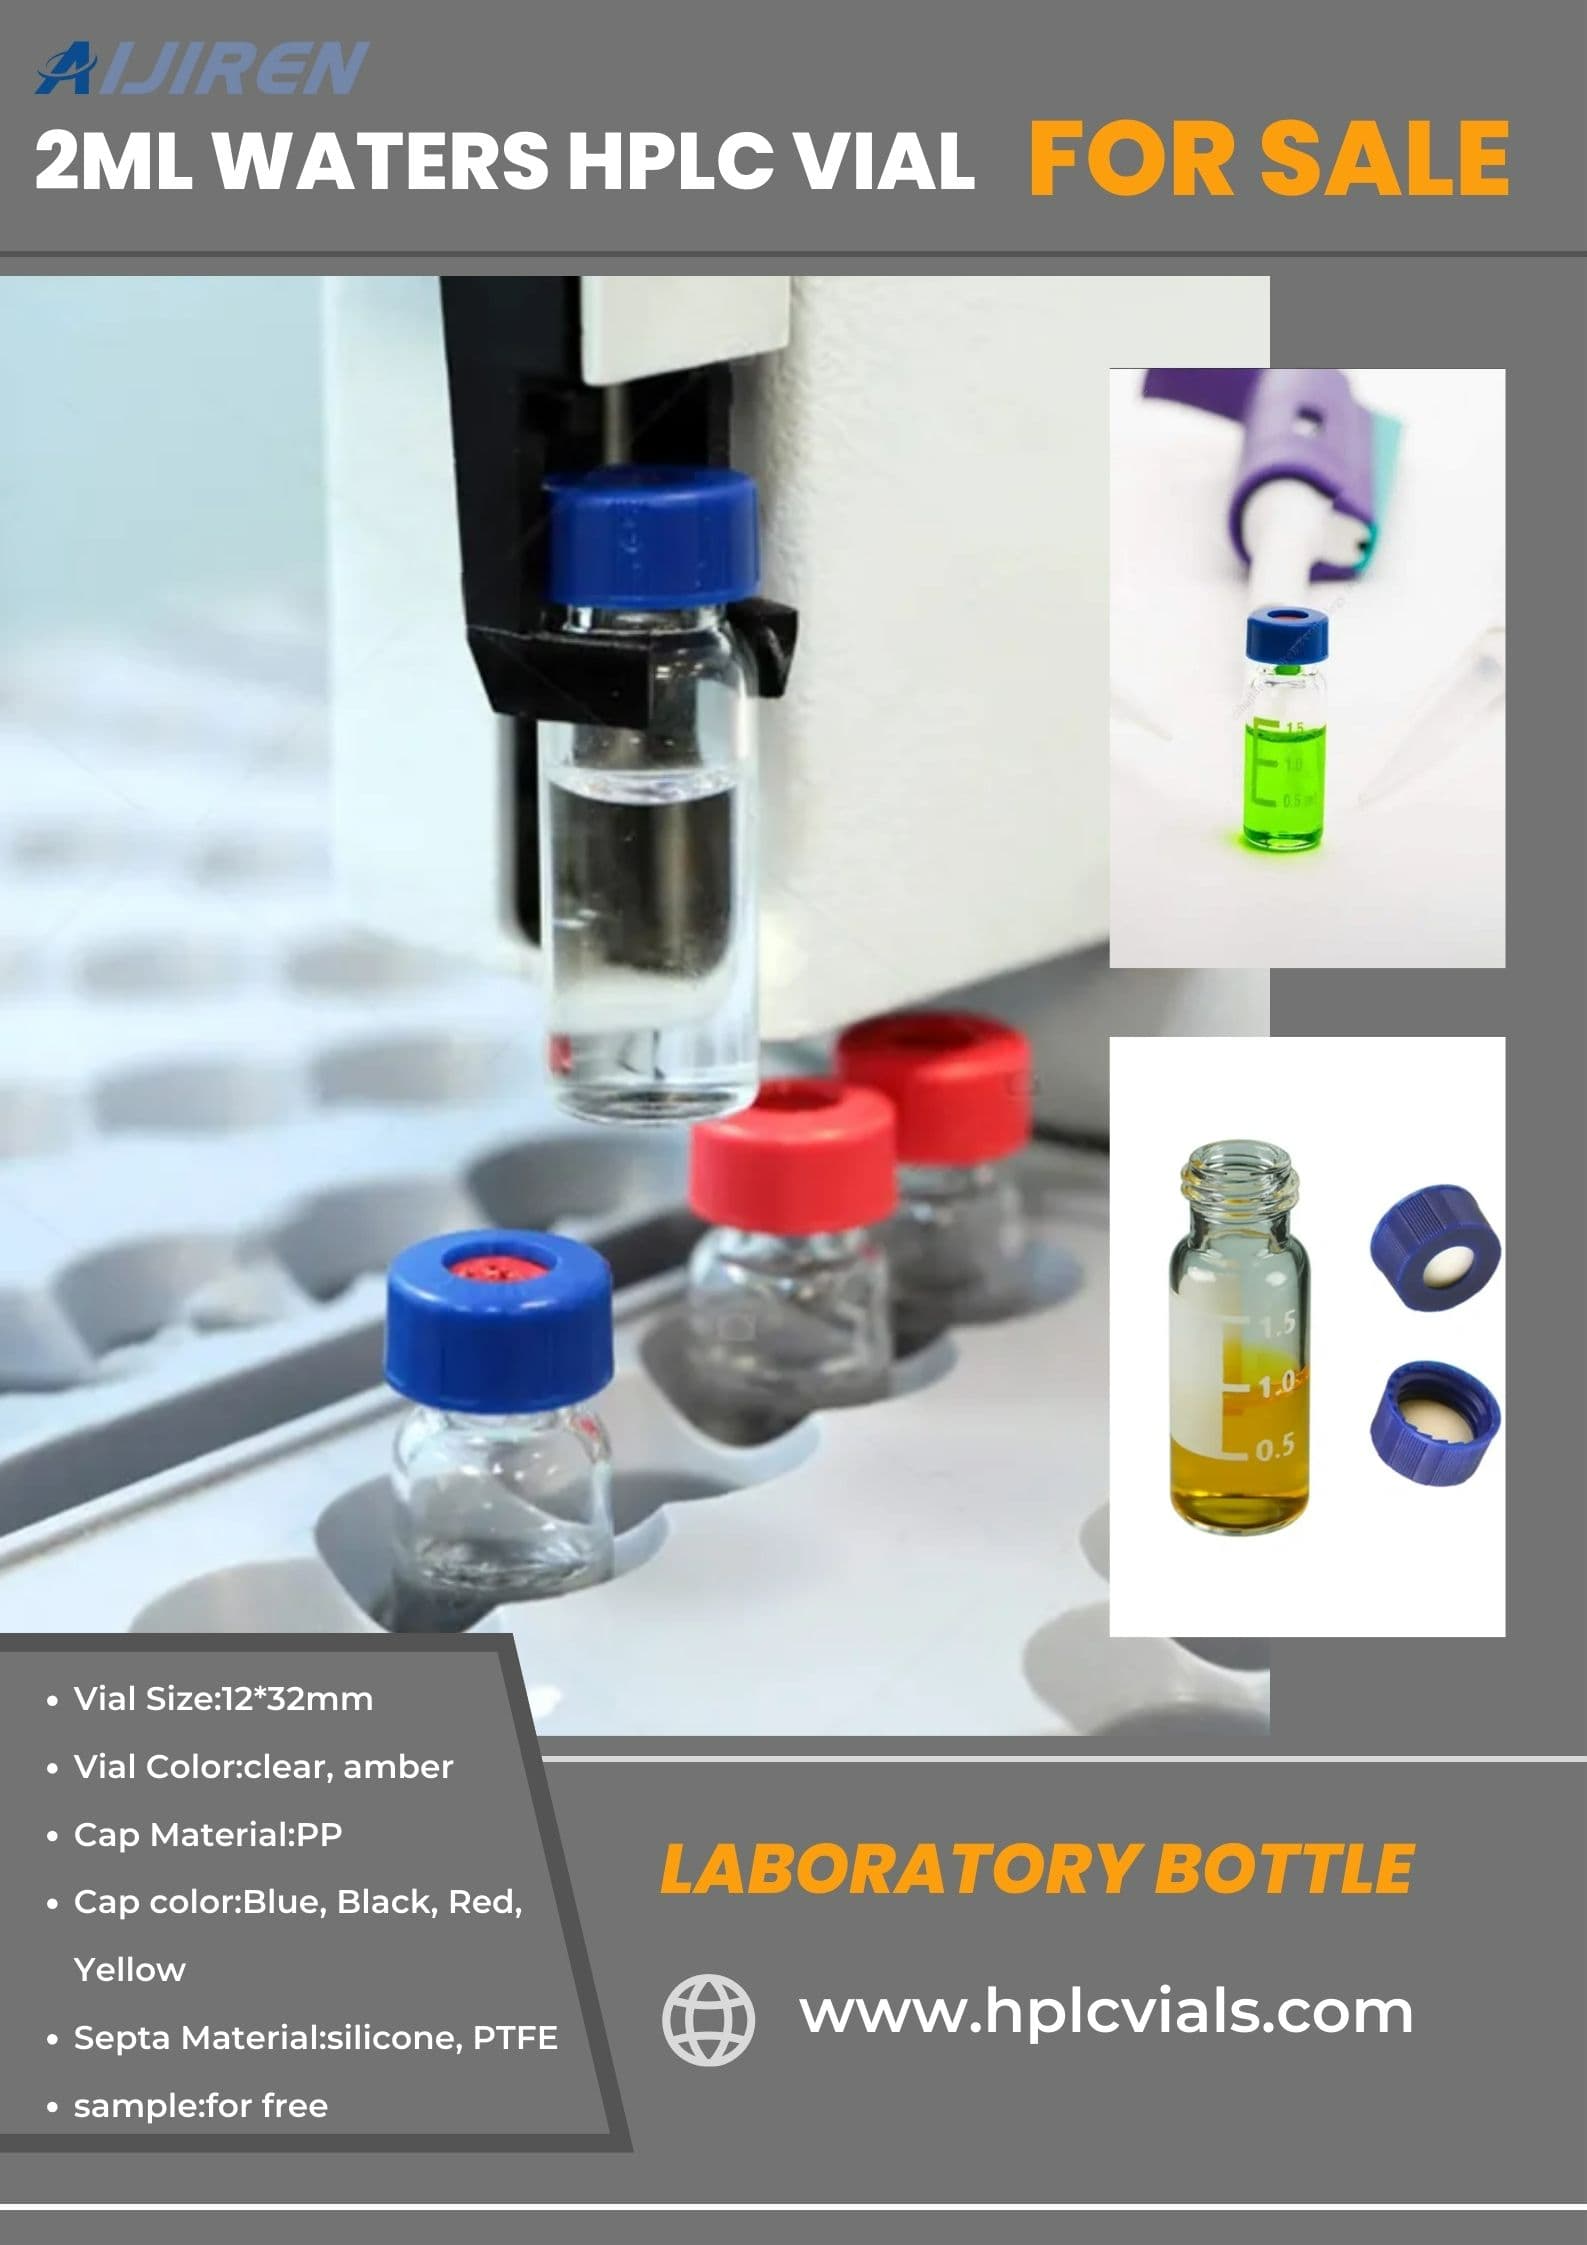 9-425 glass vial 2ml Waters HPLC Chromatography Vial